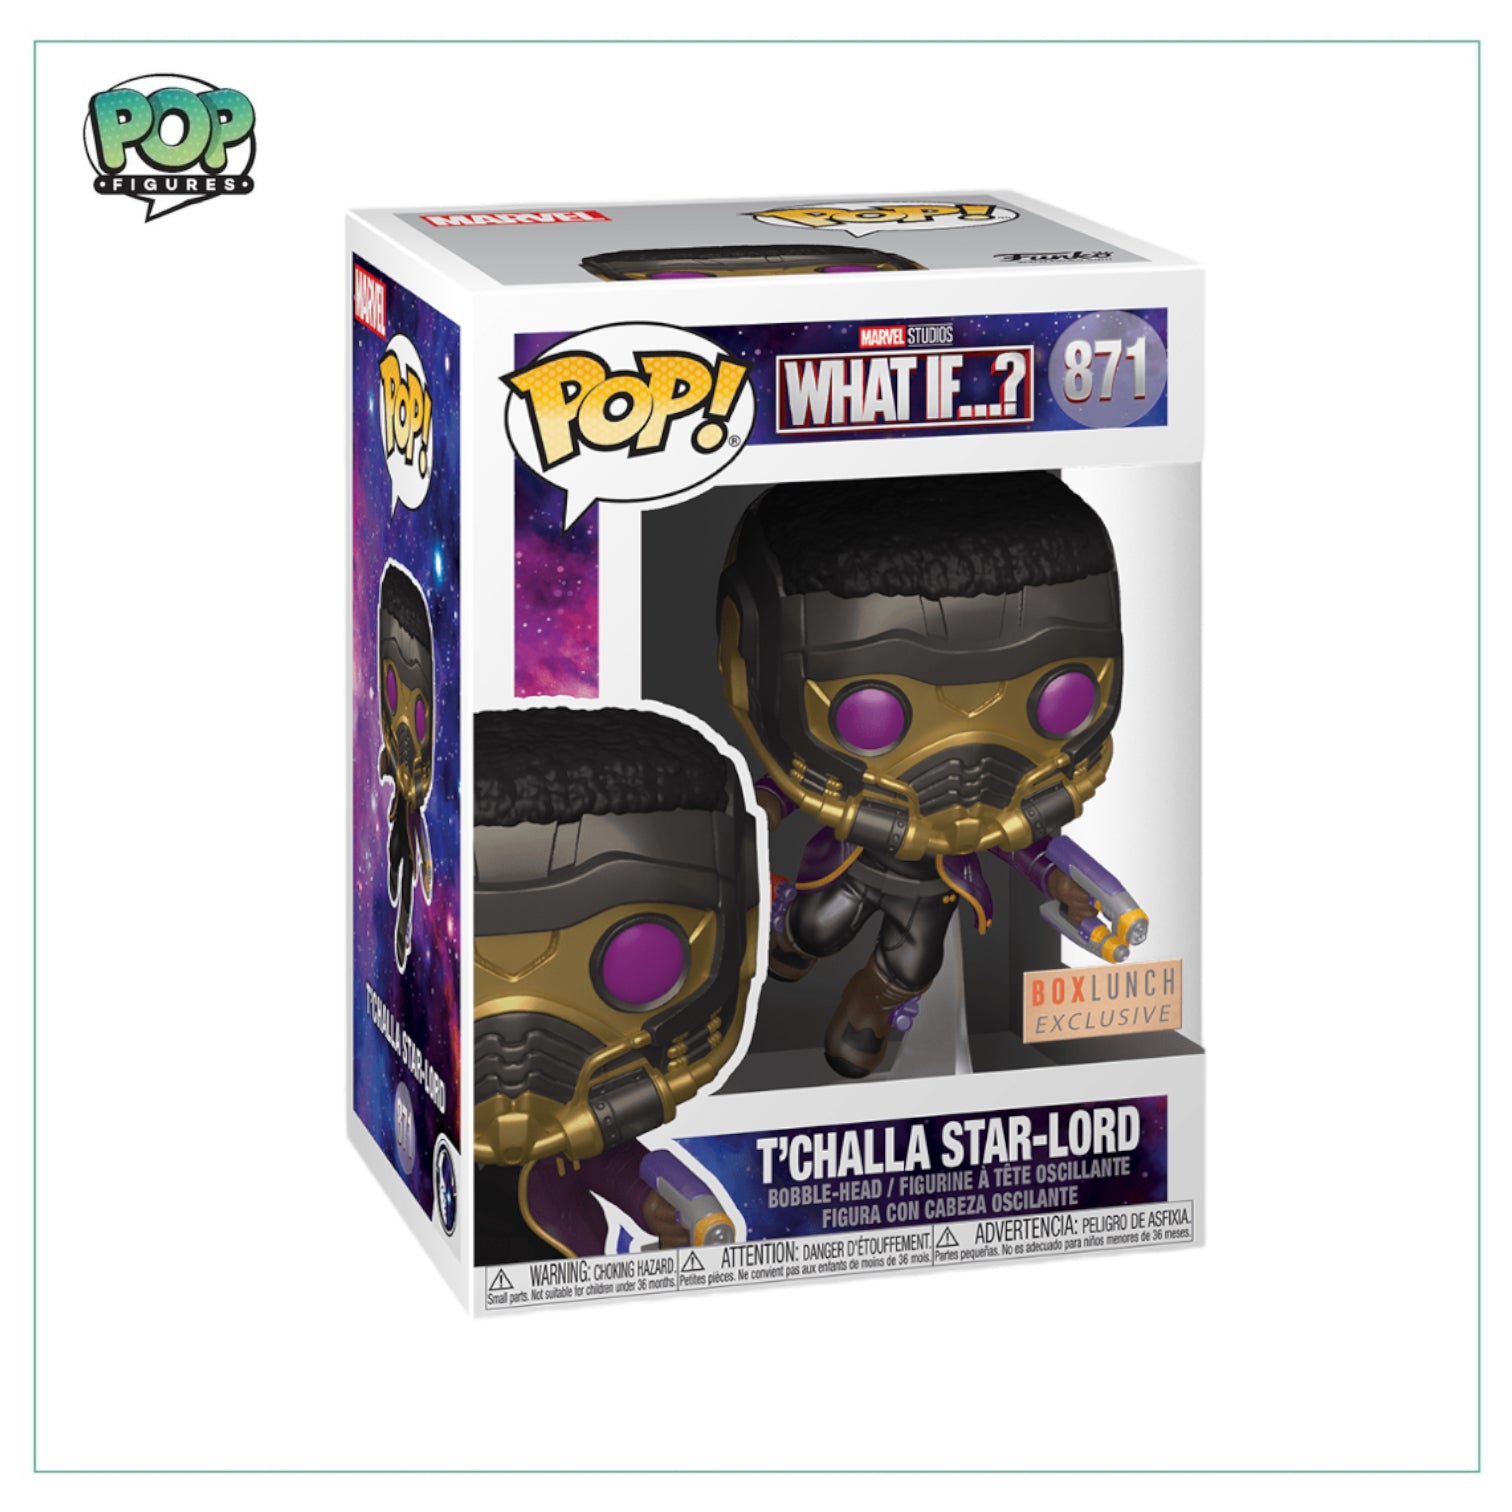 T’challa Star-Lord (Metallic) #871 Funko Pop! - What If…? - Box Lunch Exclusive